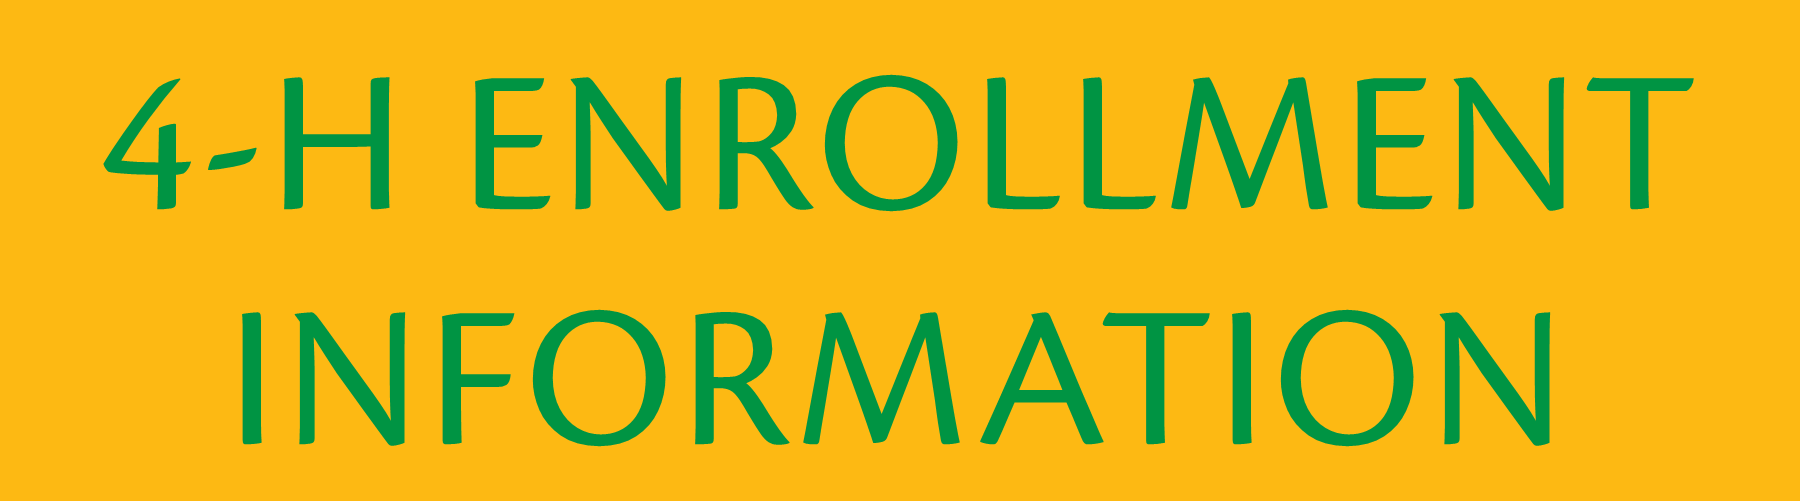 4-H Enrollment Information button that links to the Central Sierra 4-H Enrollment page